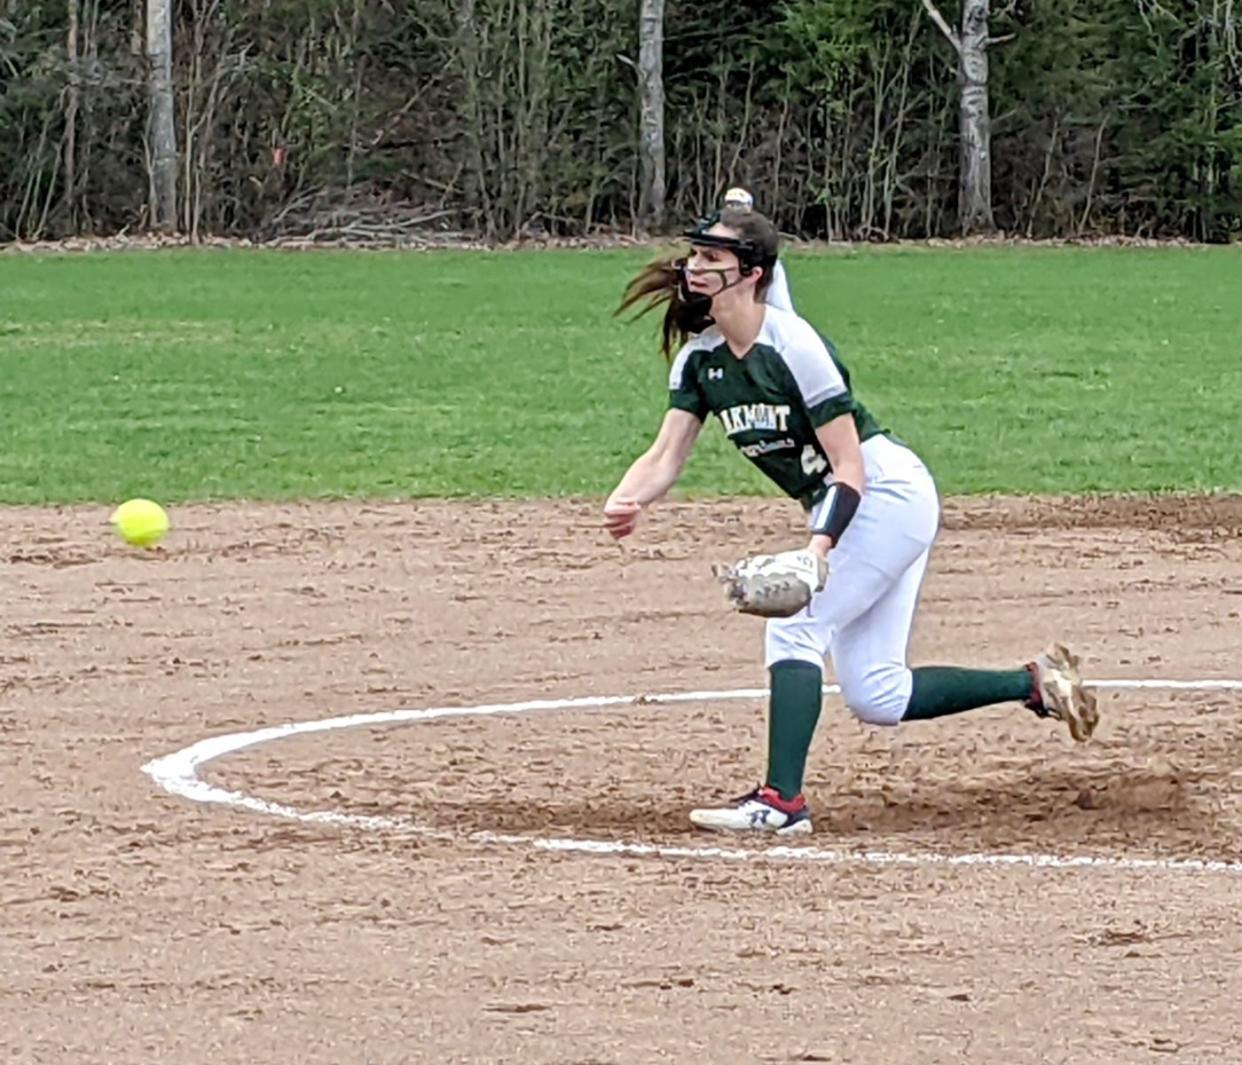 Oakmont's Allison Hazel delivers a pitch to the plate during Wednesday's game against Monty Tech in Ashburnham.